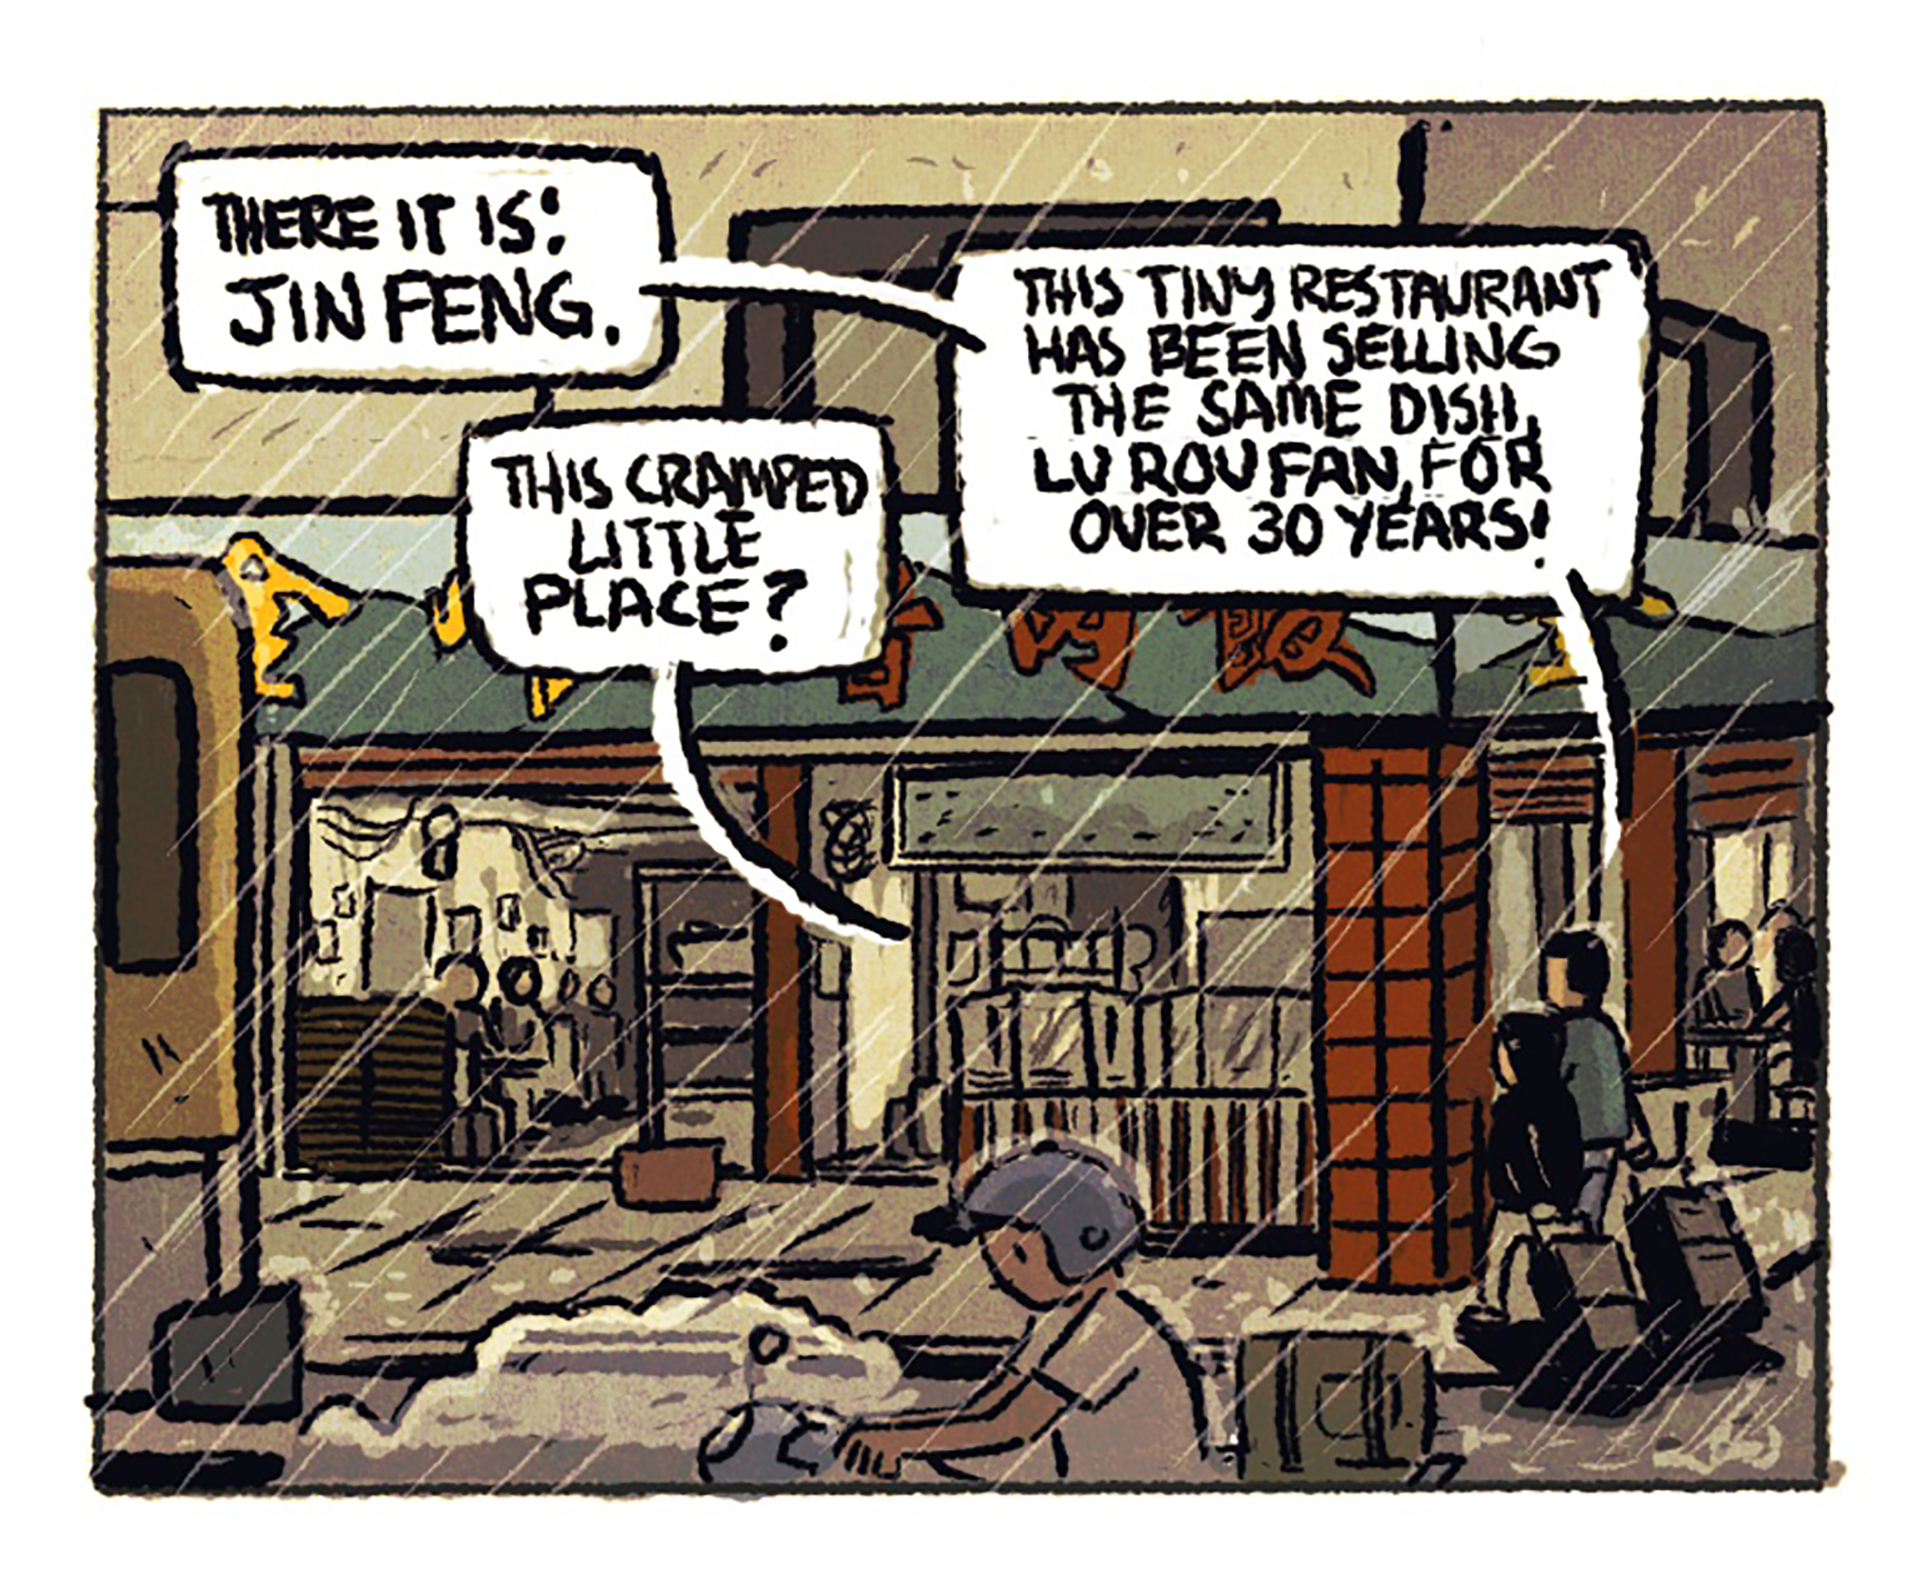 The blue-and-green facade of a small restaurant that opens out onto the street; rain is coming down. 1st speech bubble: "There it is! Jin Feng." 2nd speech bubble: "This cramped little place?" 3rd speech bubble: "This tiny restaurant has been selling the same dish, lu rou fan, for over 30 years!"